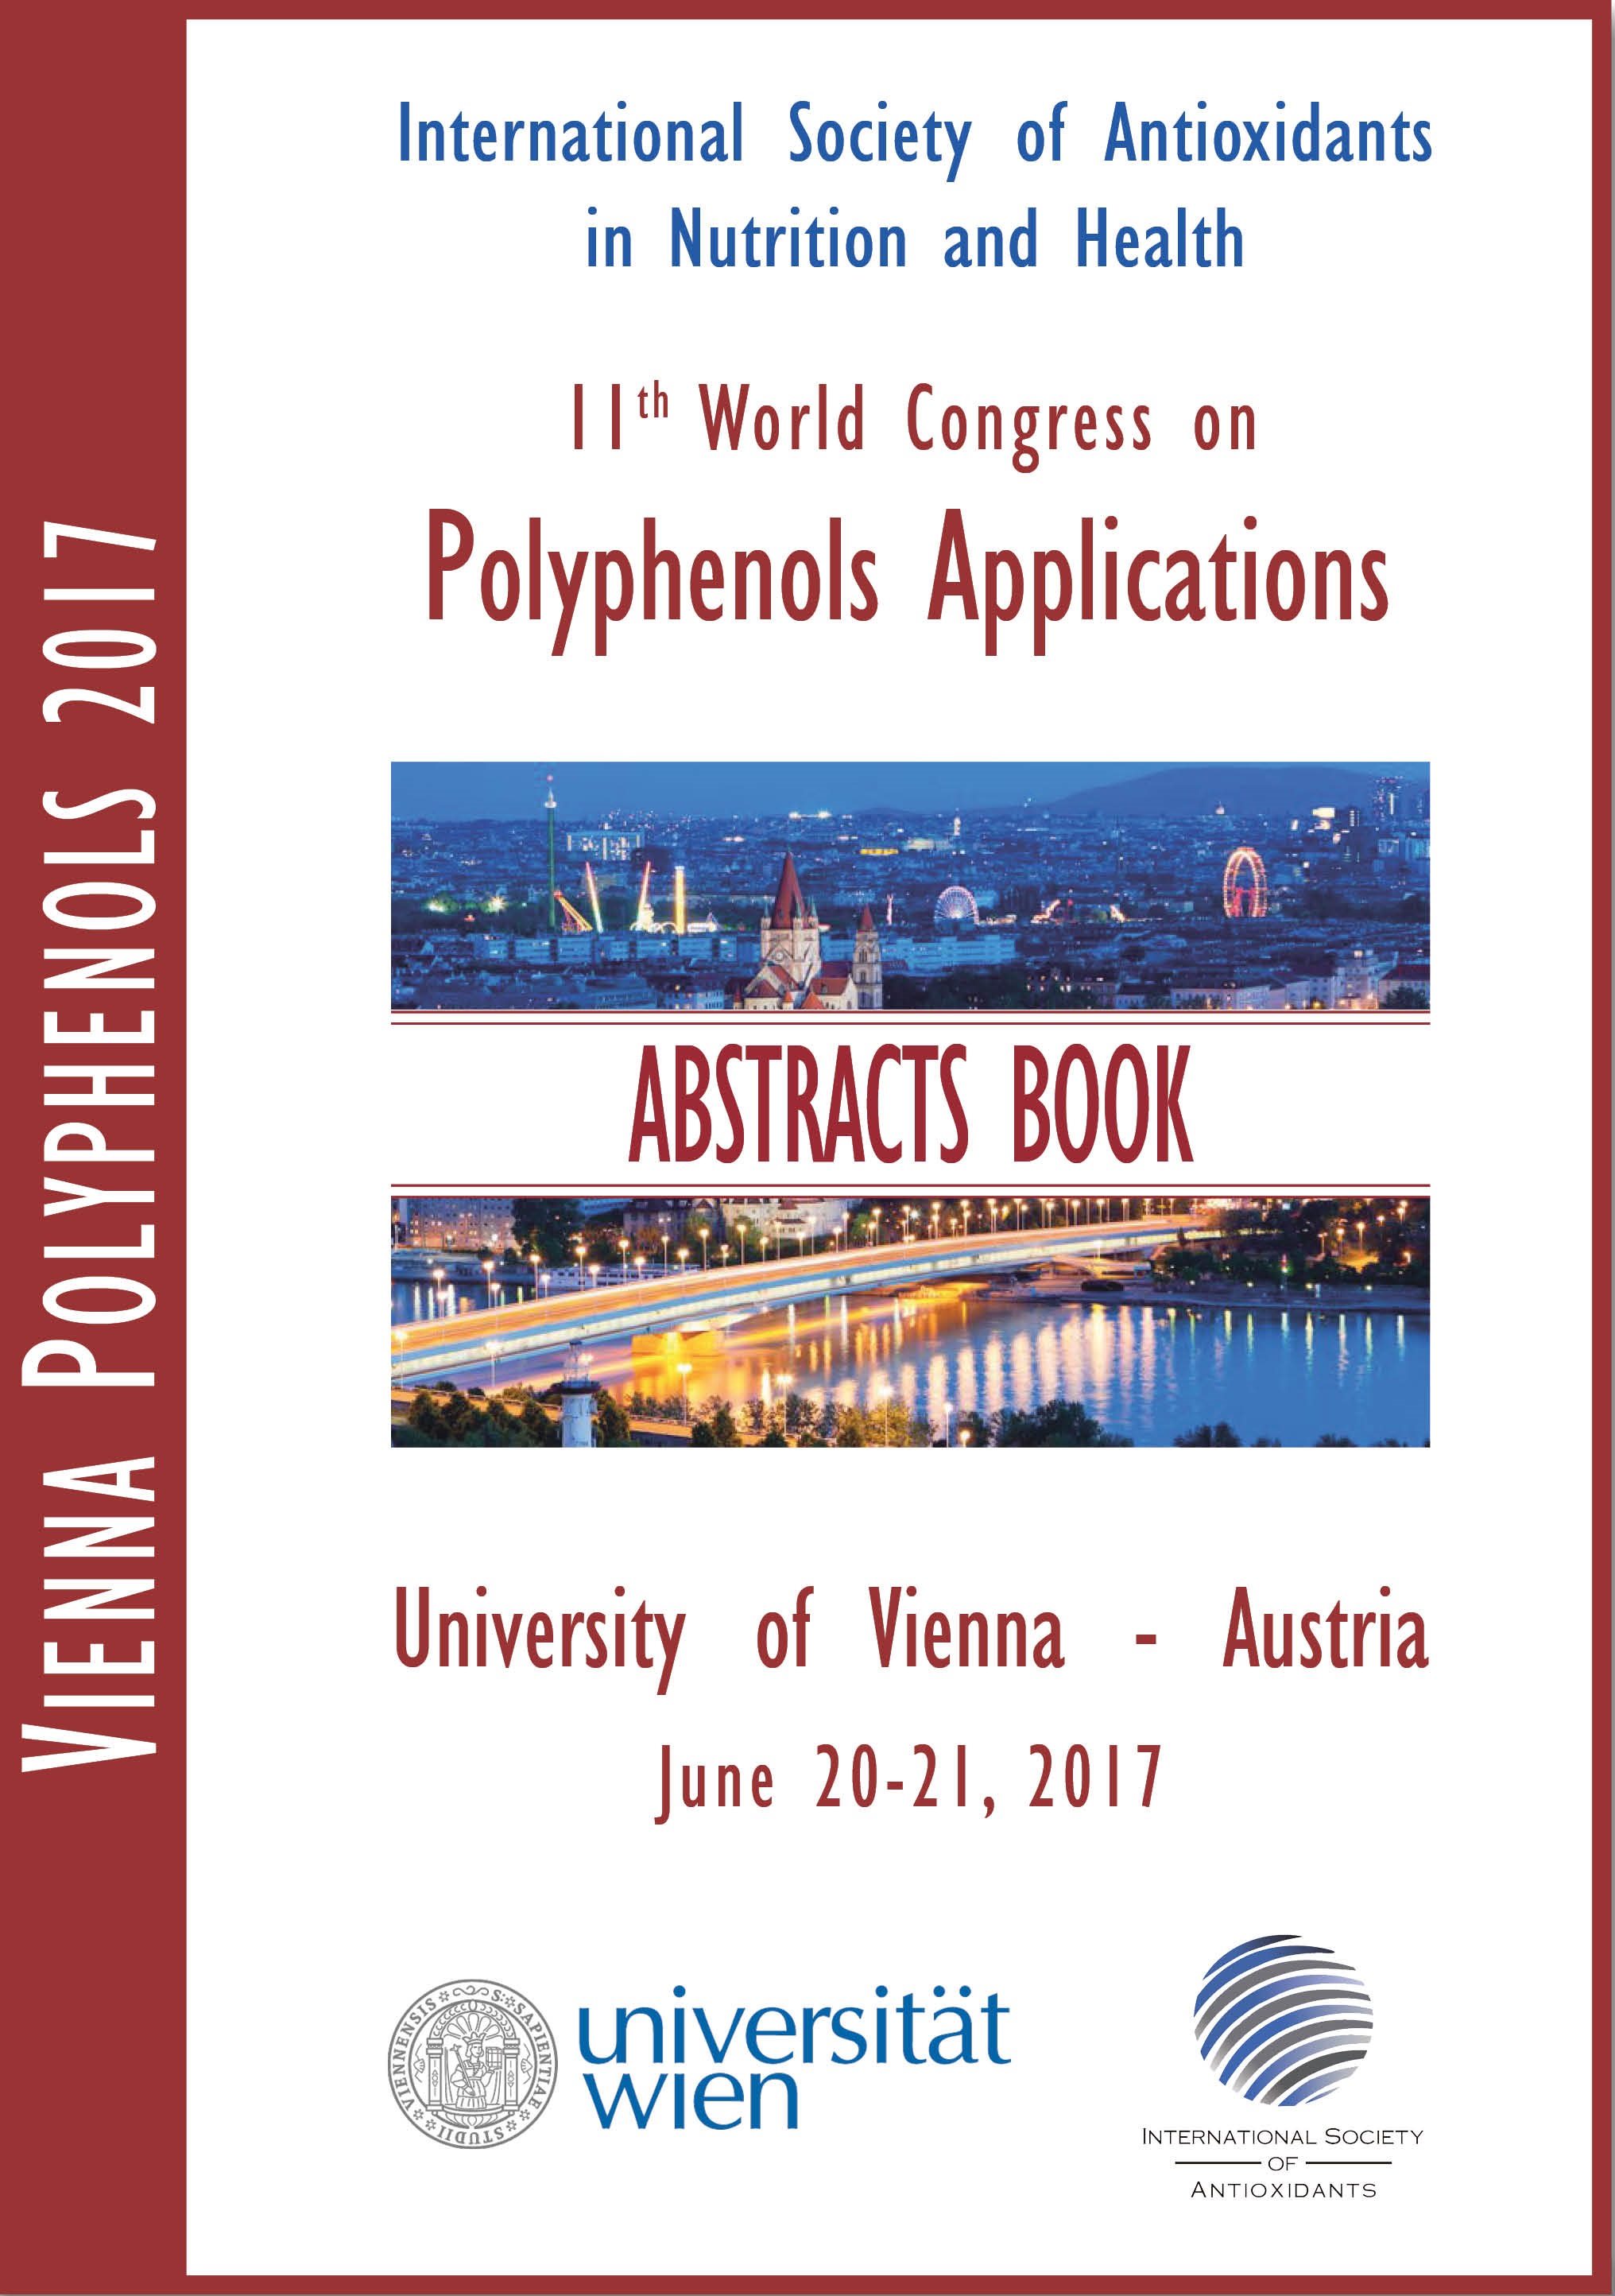 Polyphenols2017-abstract book